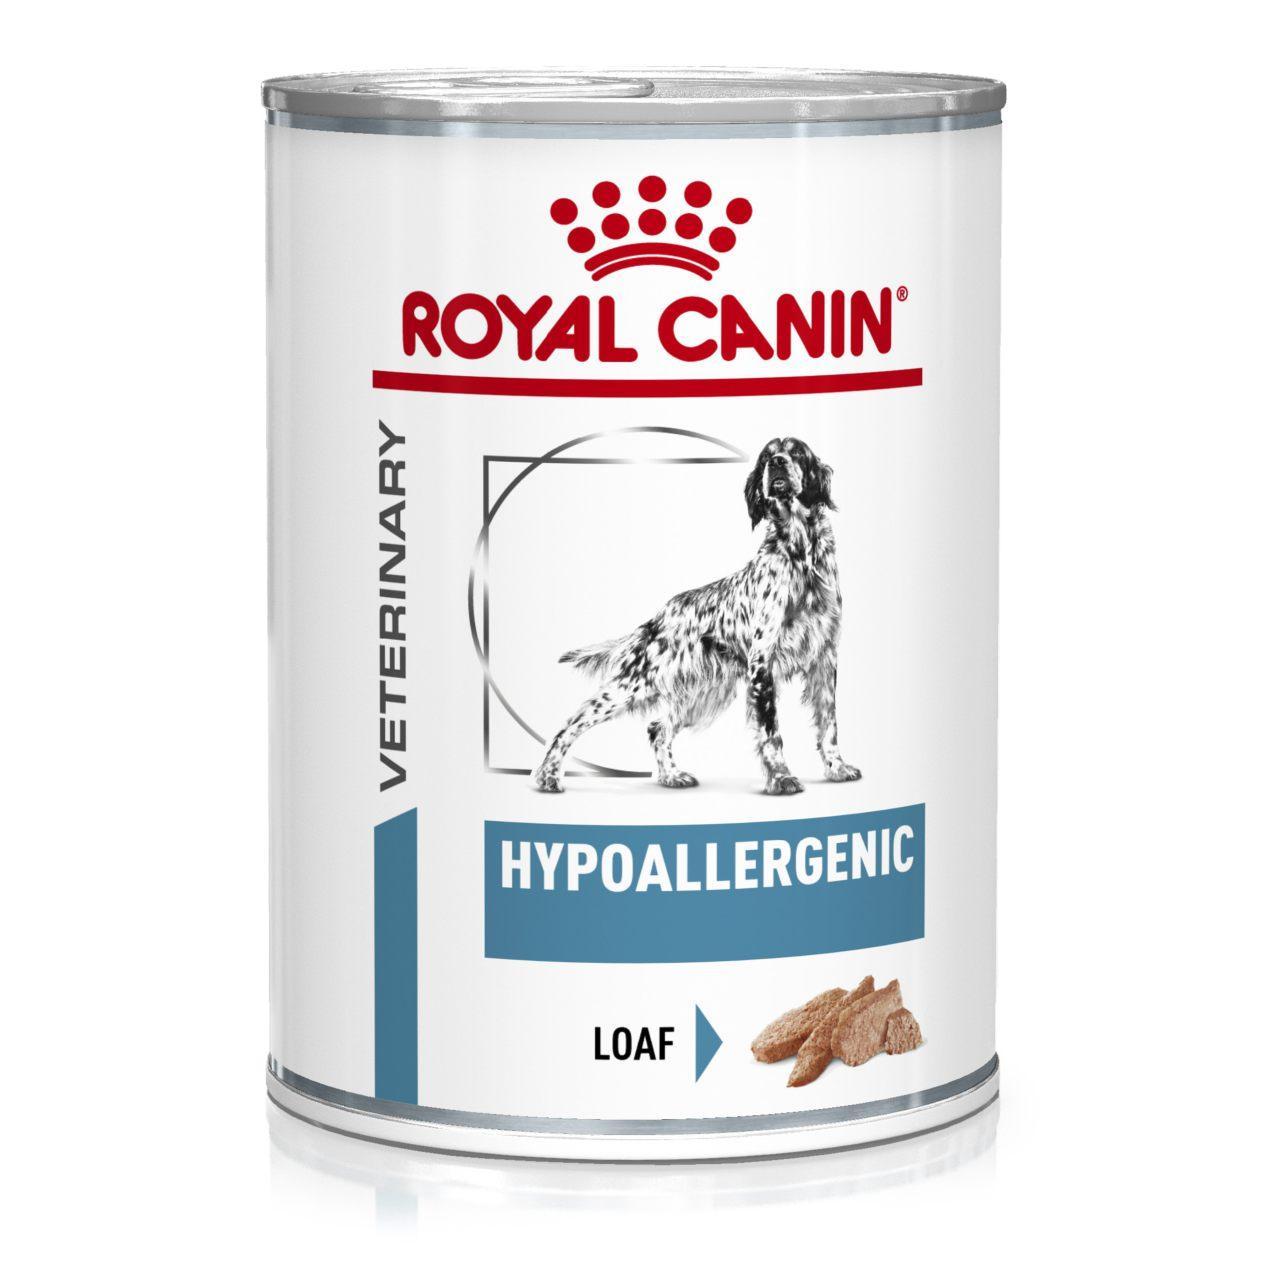 An image of Royal Canin Canine Hypoallergenic